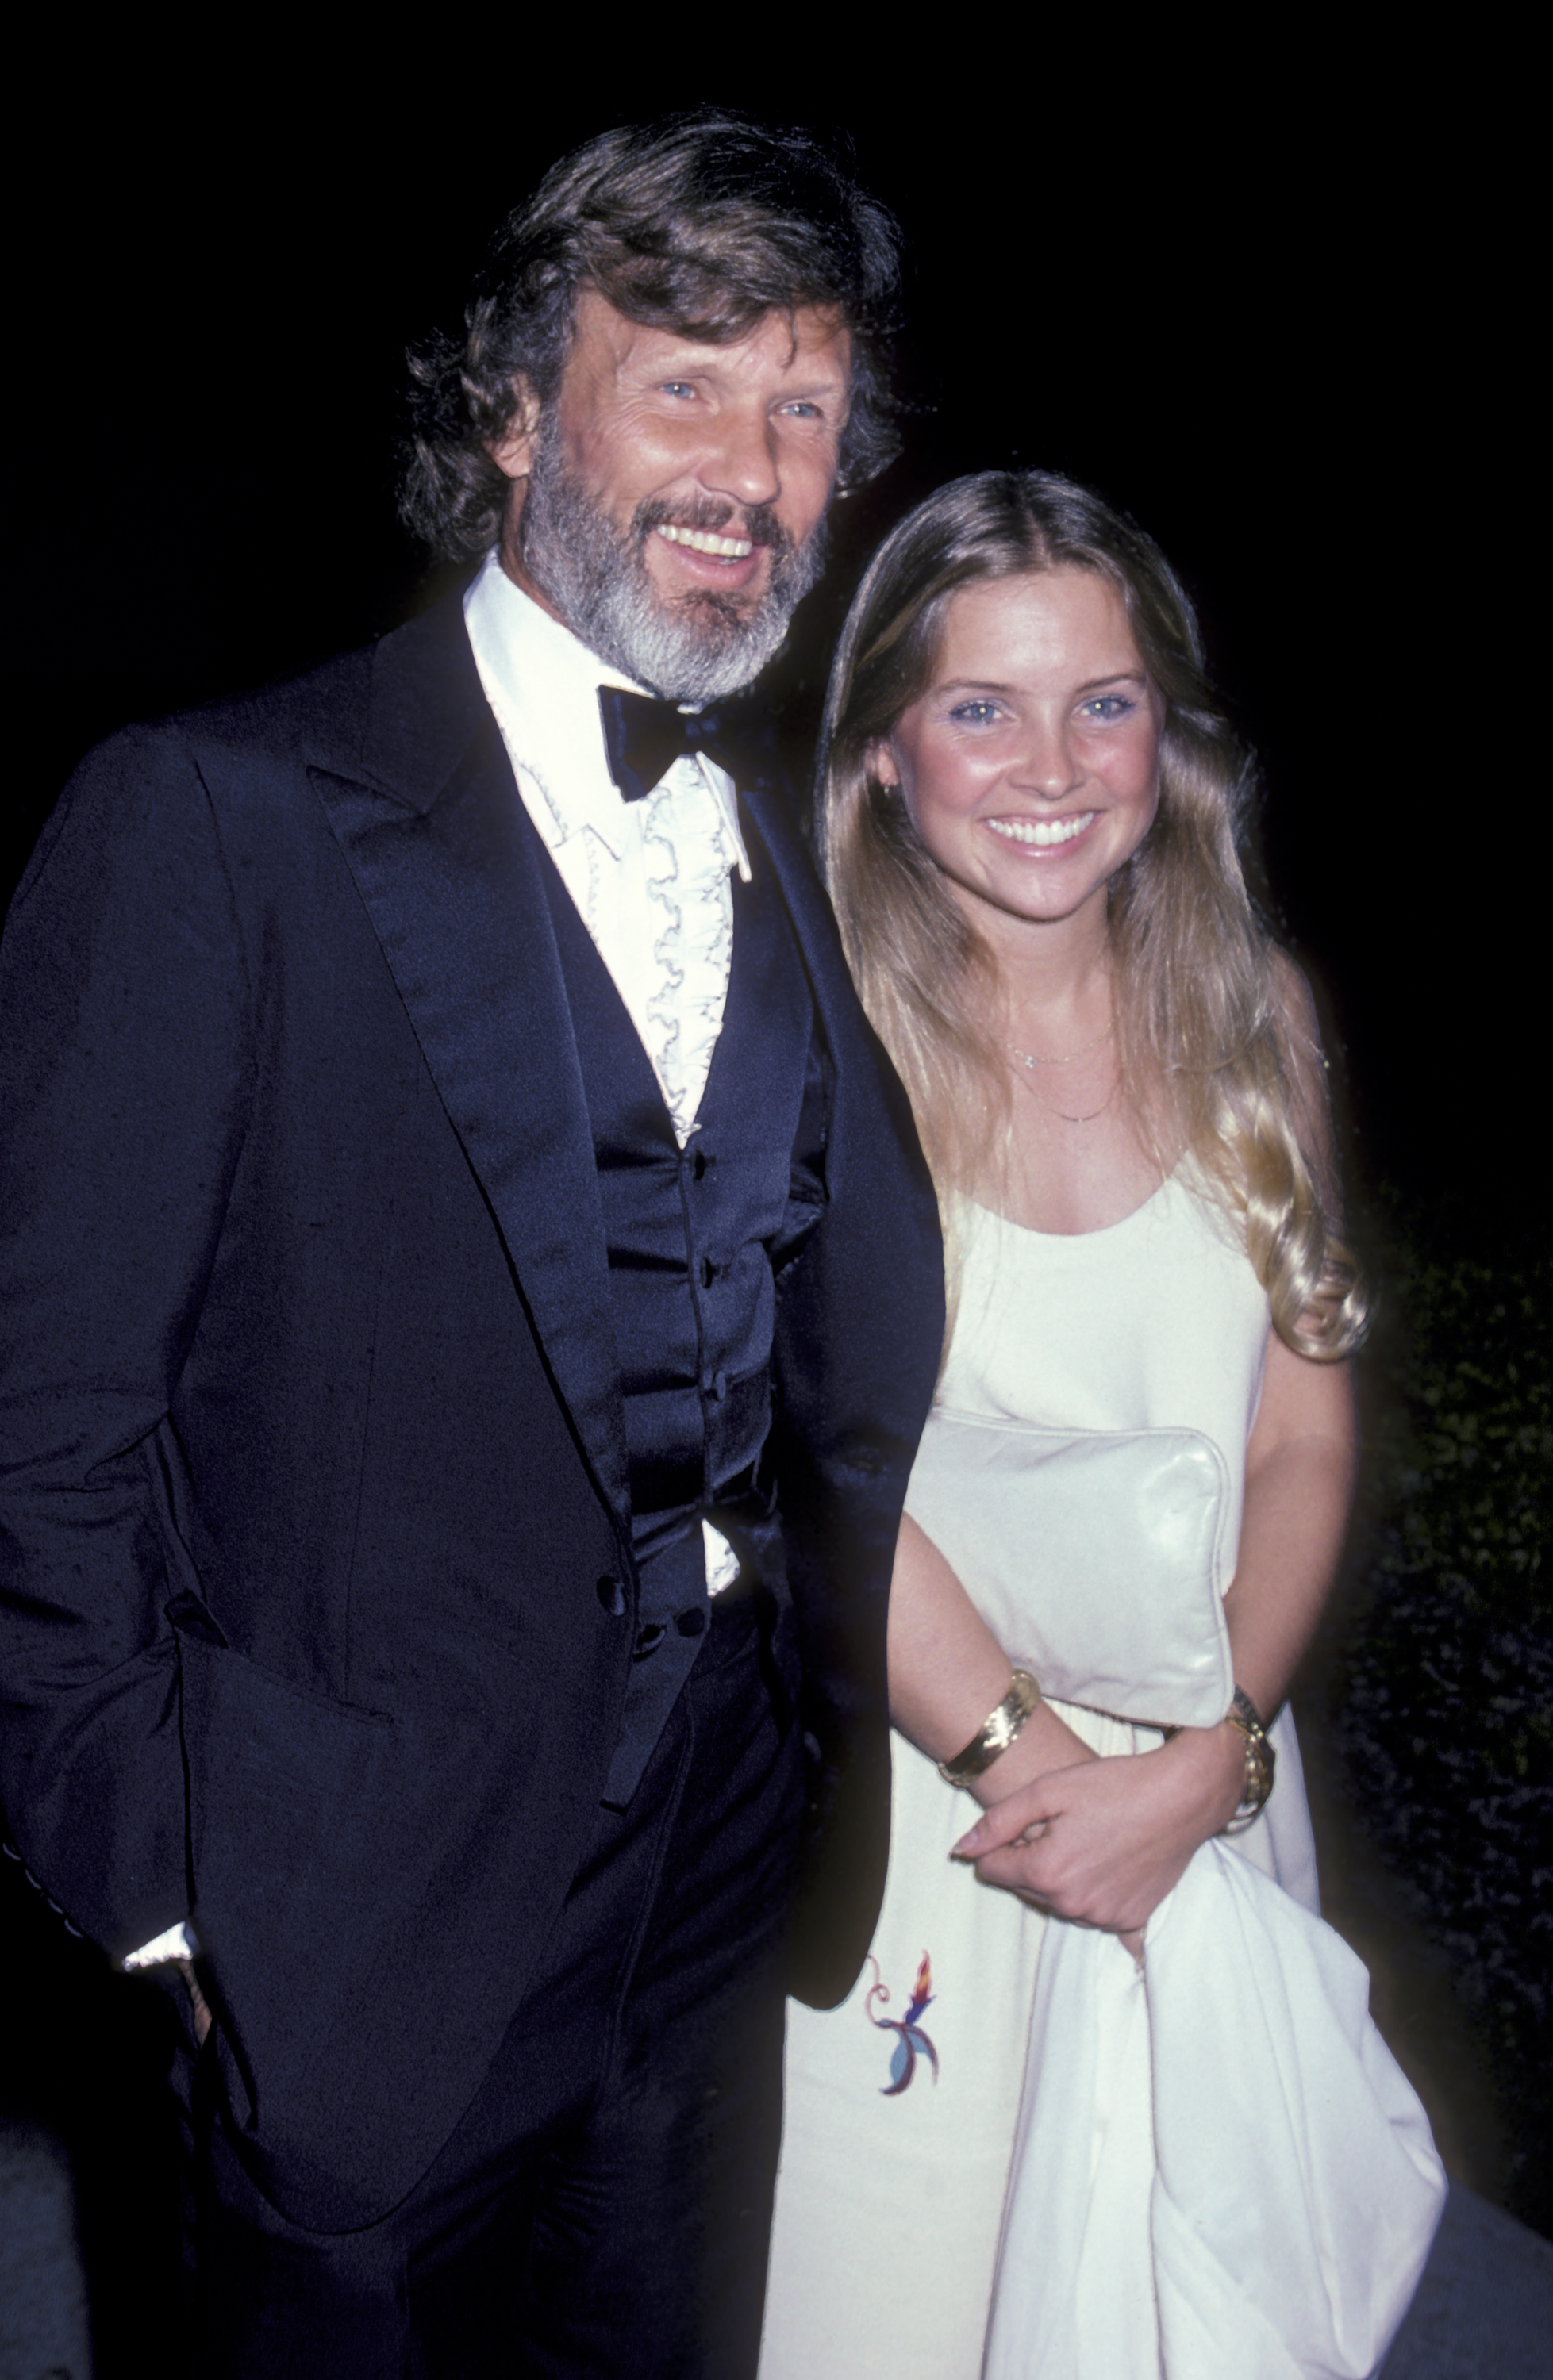 Kris Kristofferson and Tracy Kristofferson attend the birthday party for Diana Ross on March 26, 1982, in Beverly Hills, California. | Source: Getty Images